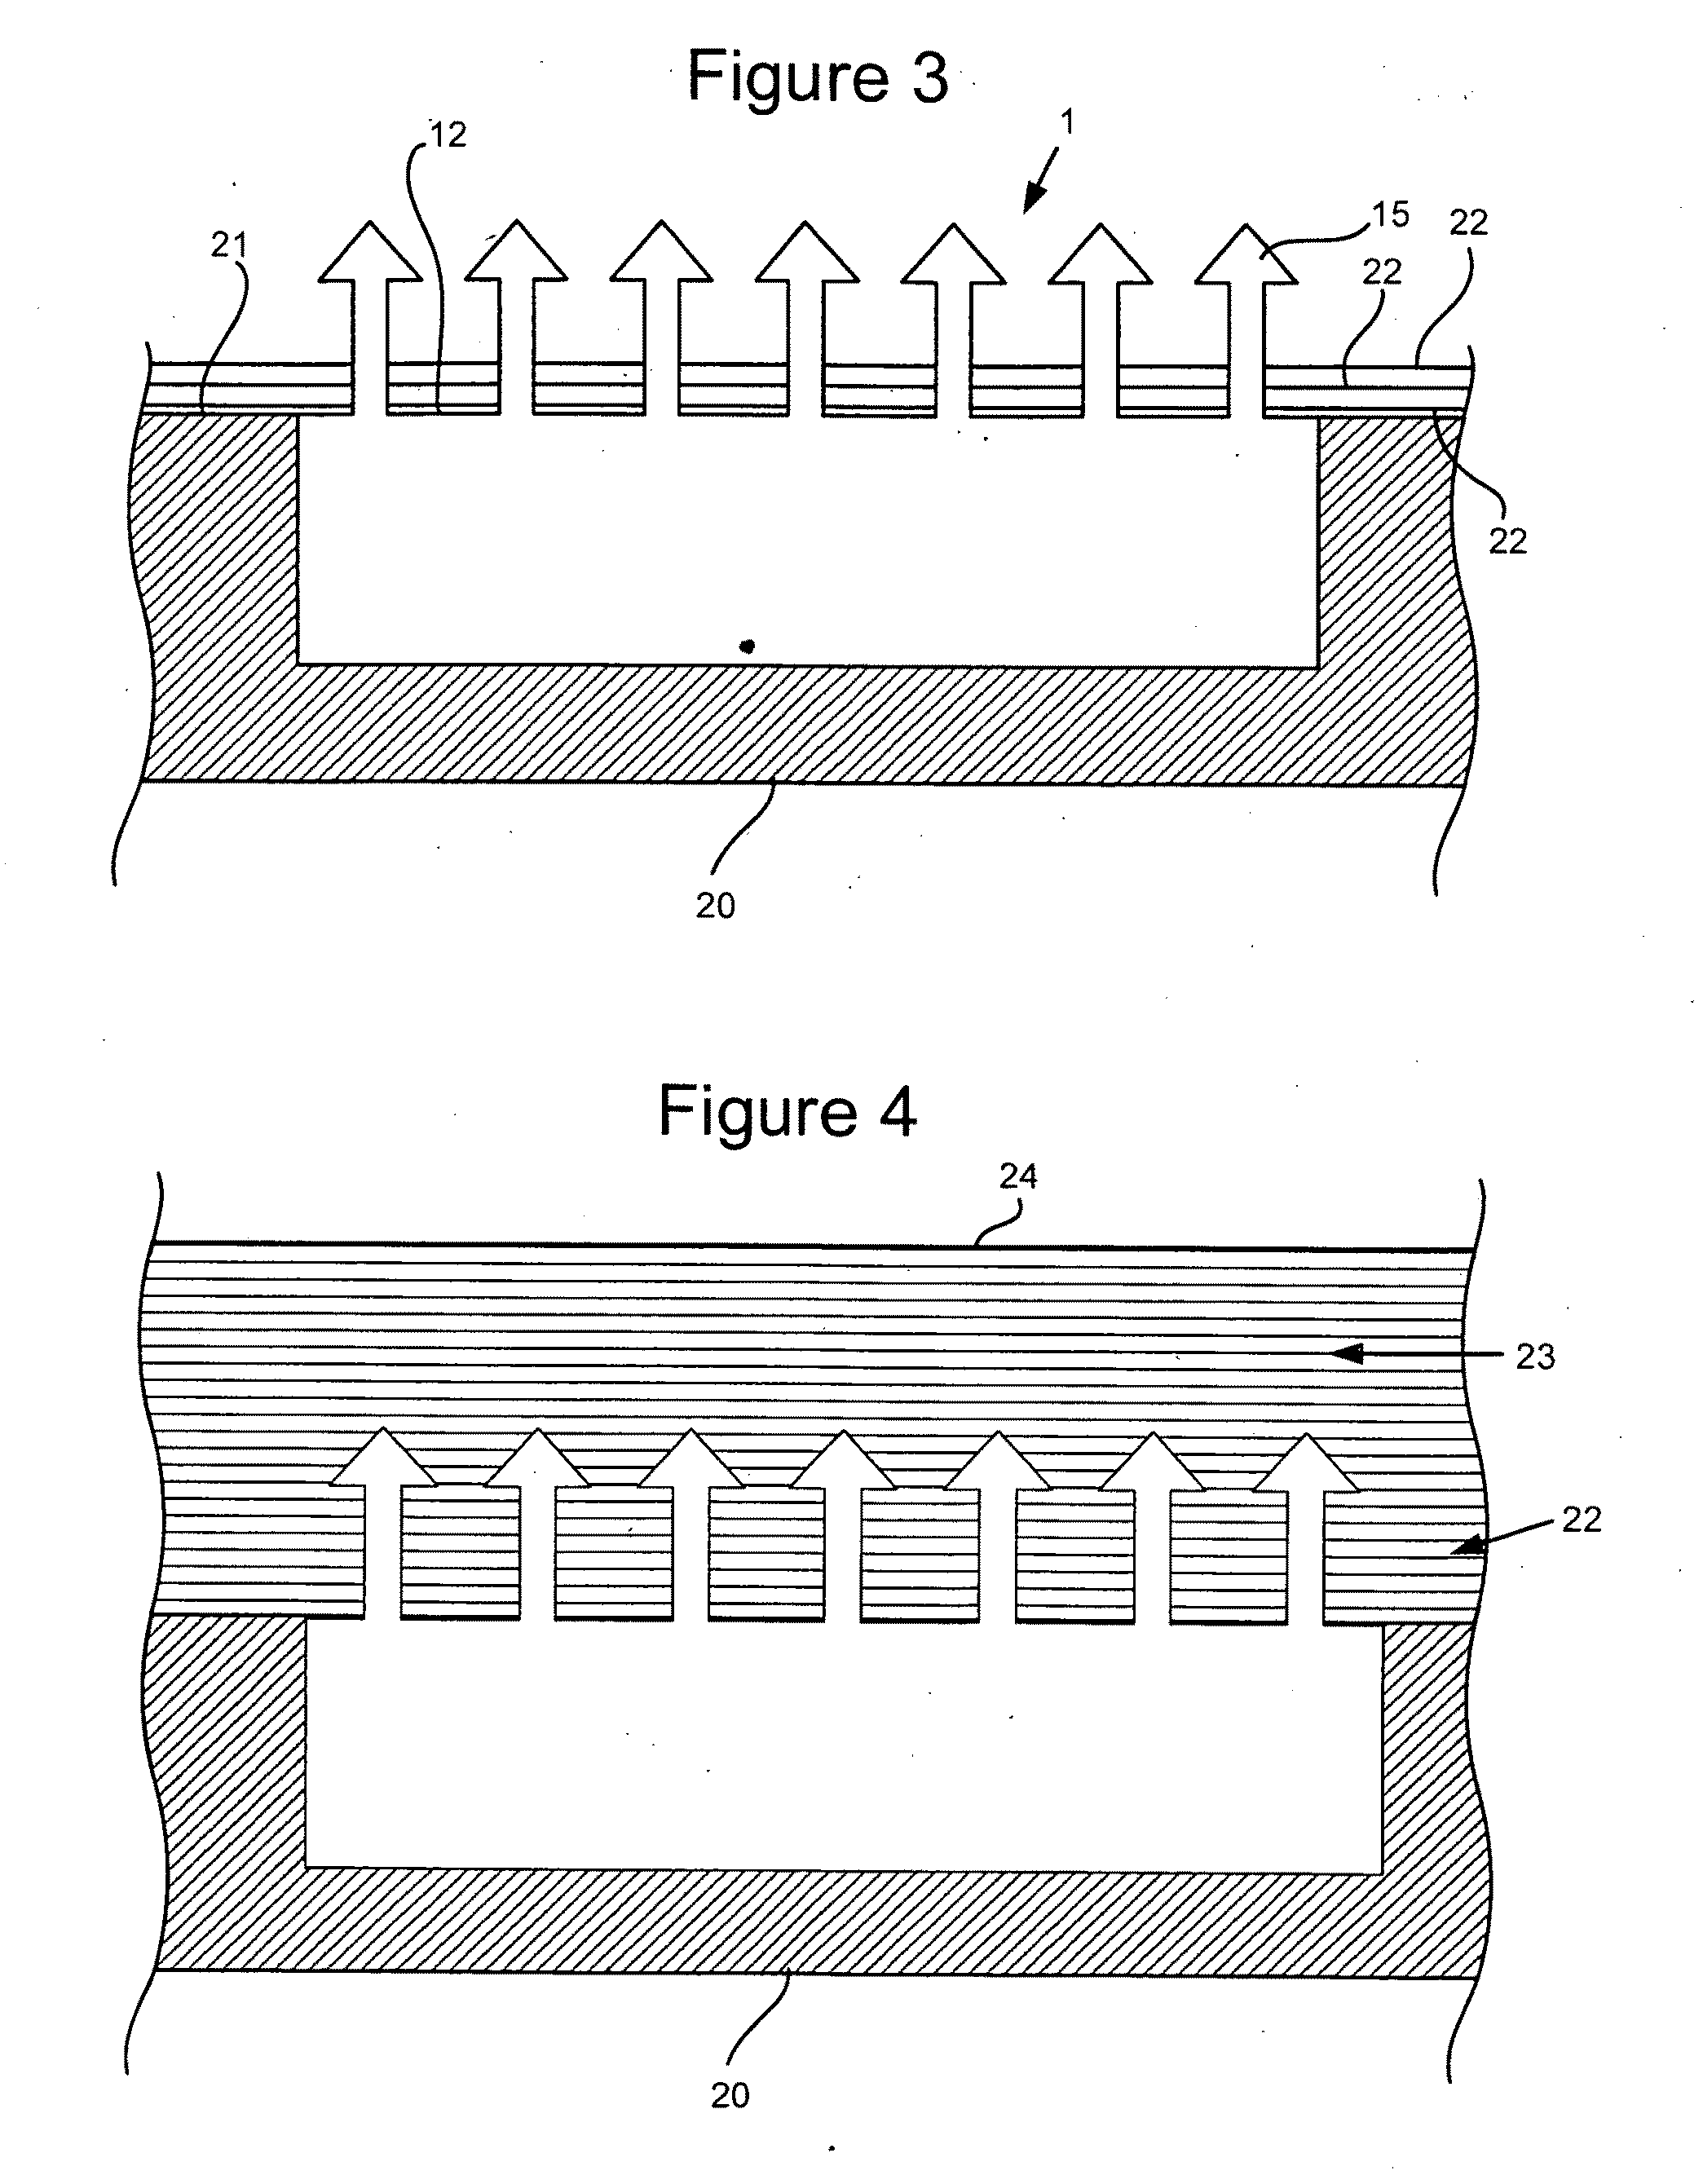 Method of forming a joint